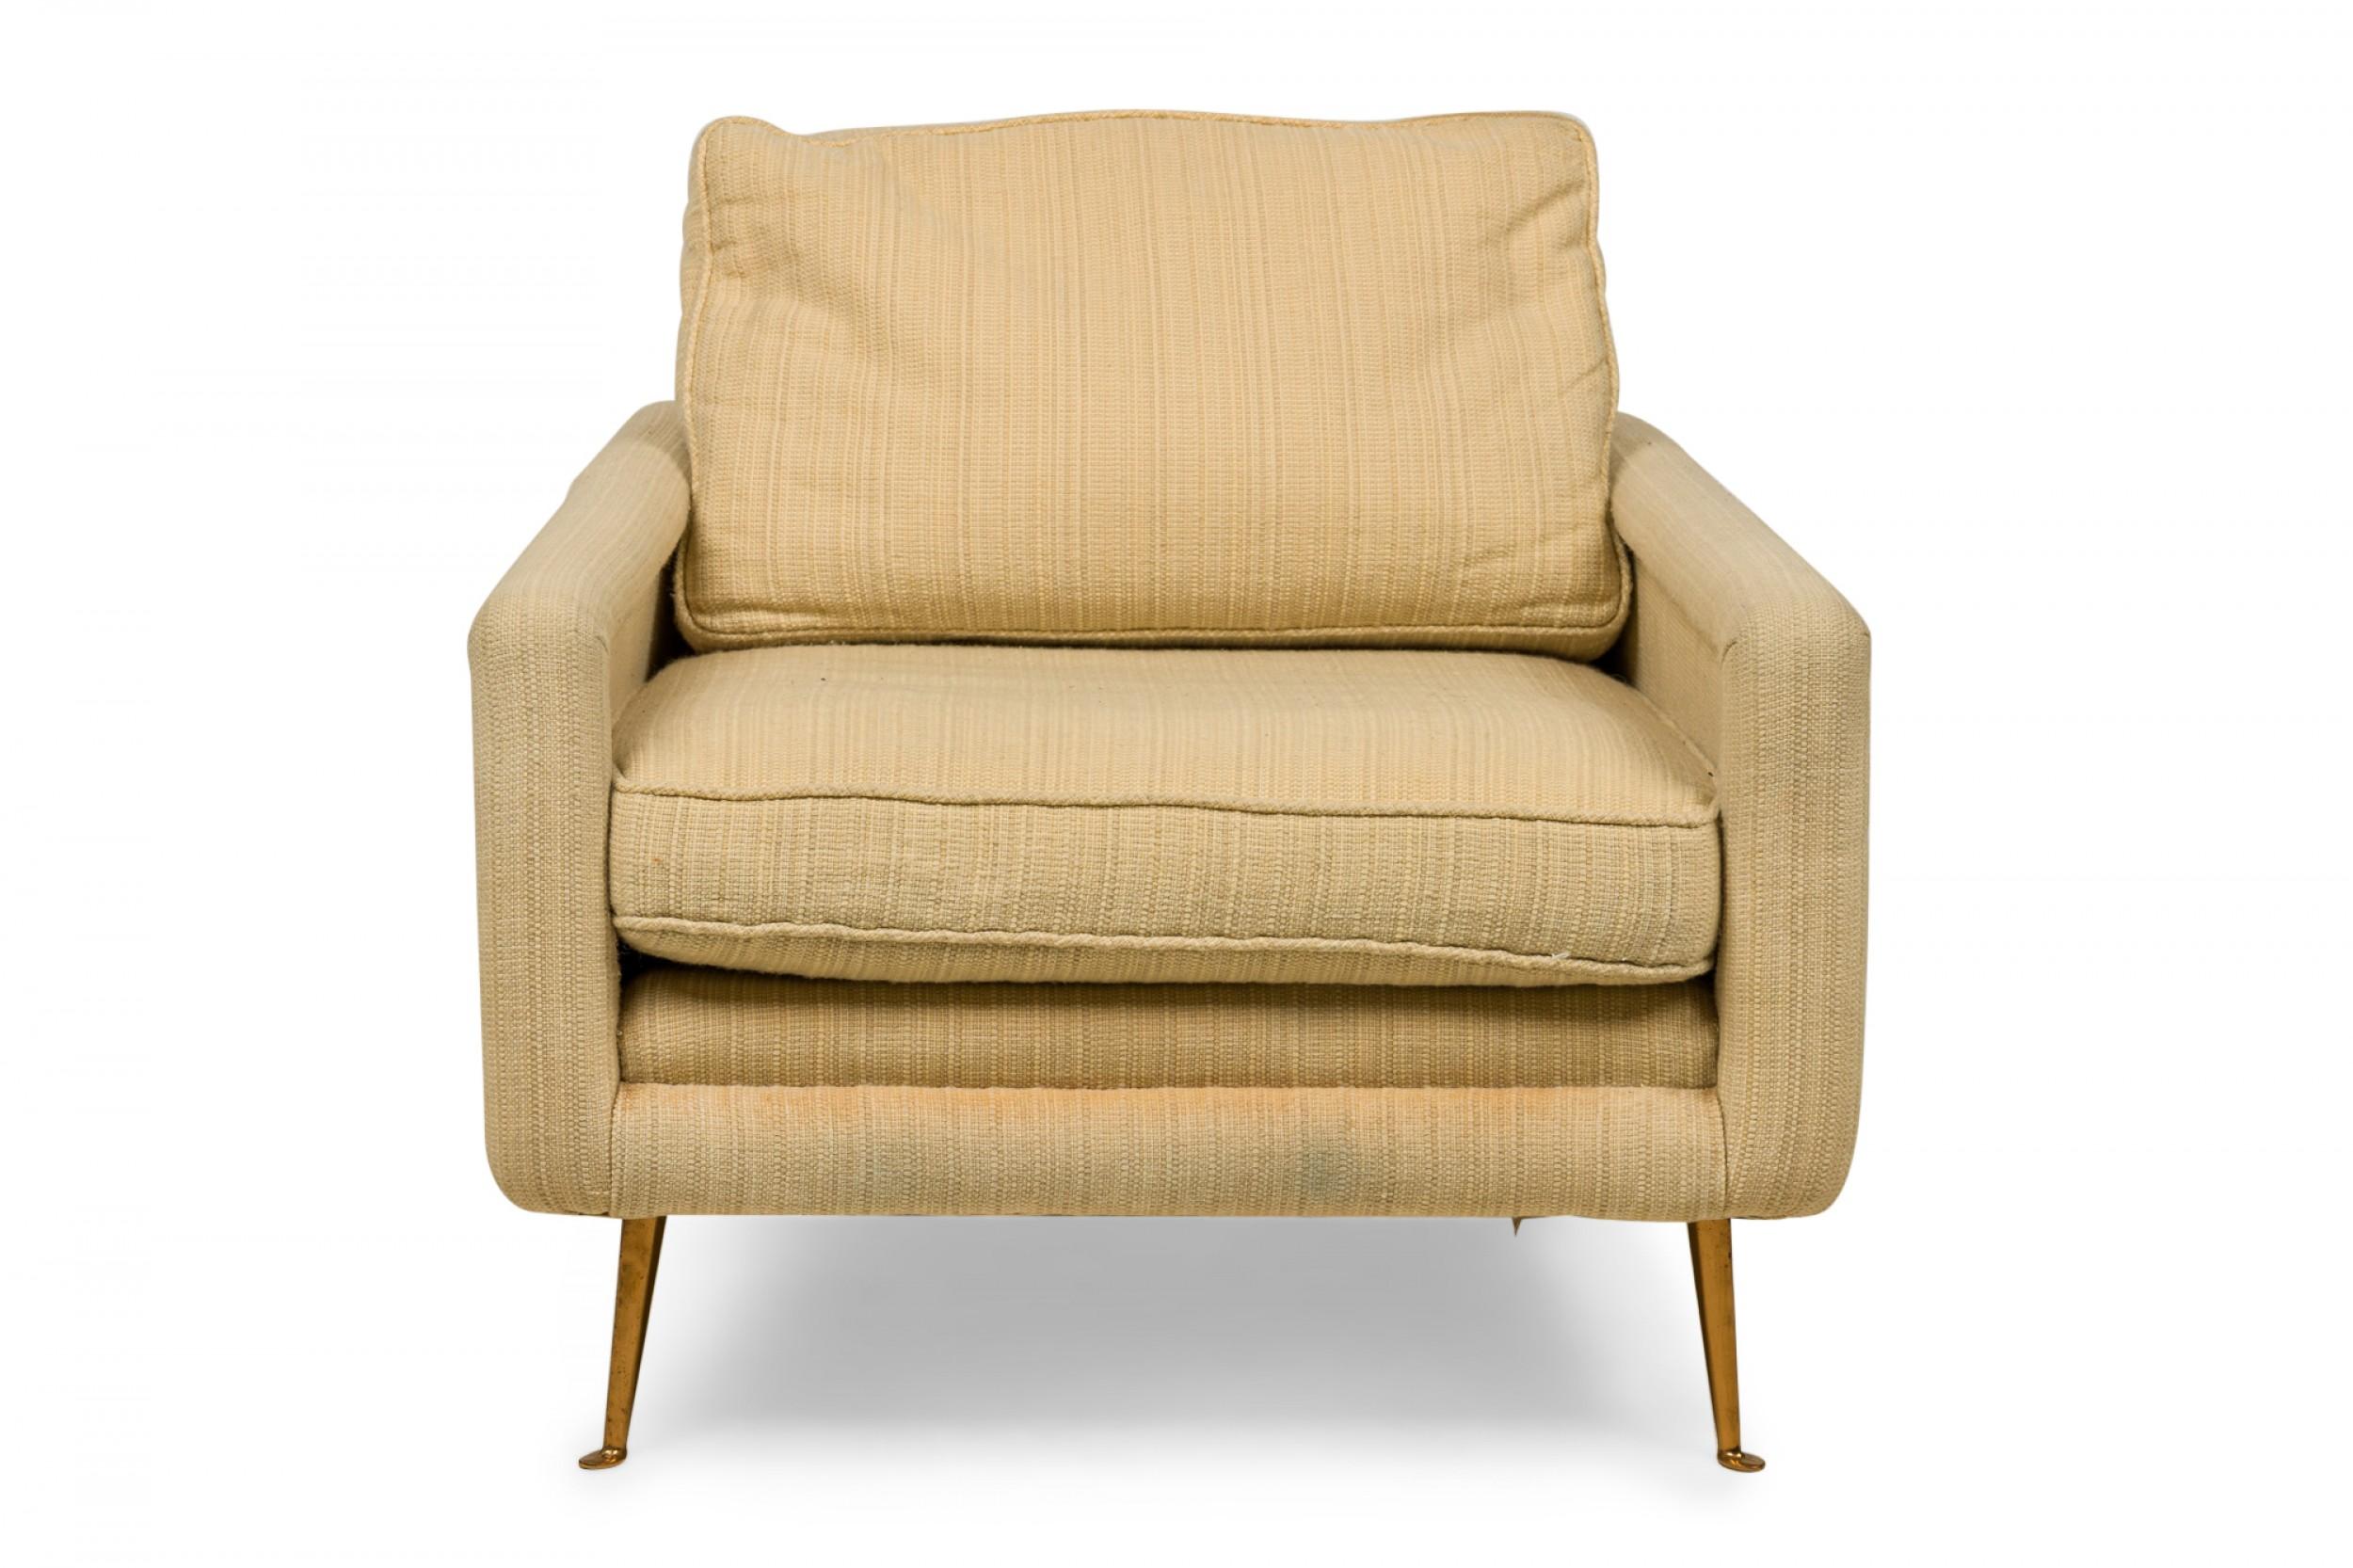 American Contemporary lounge / armchair with textured beige fabric upholstery with removable back and seat cushions resting on four tapered bronze legs ending in circular feet.